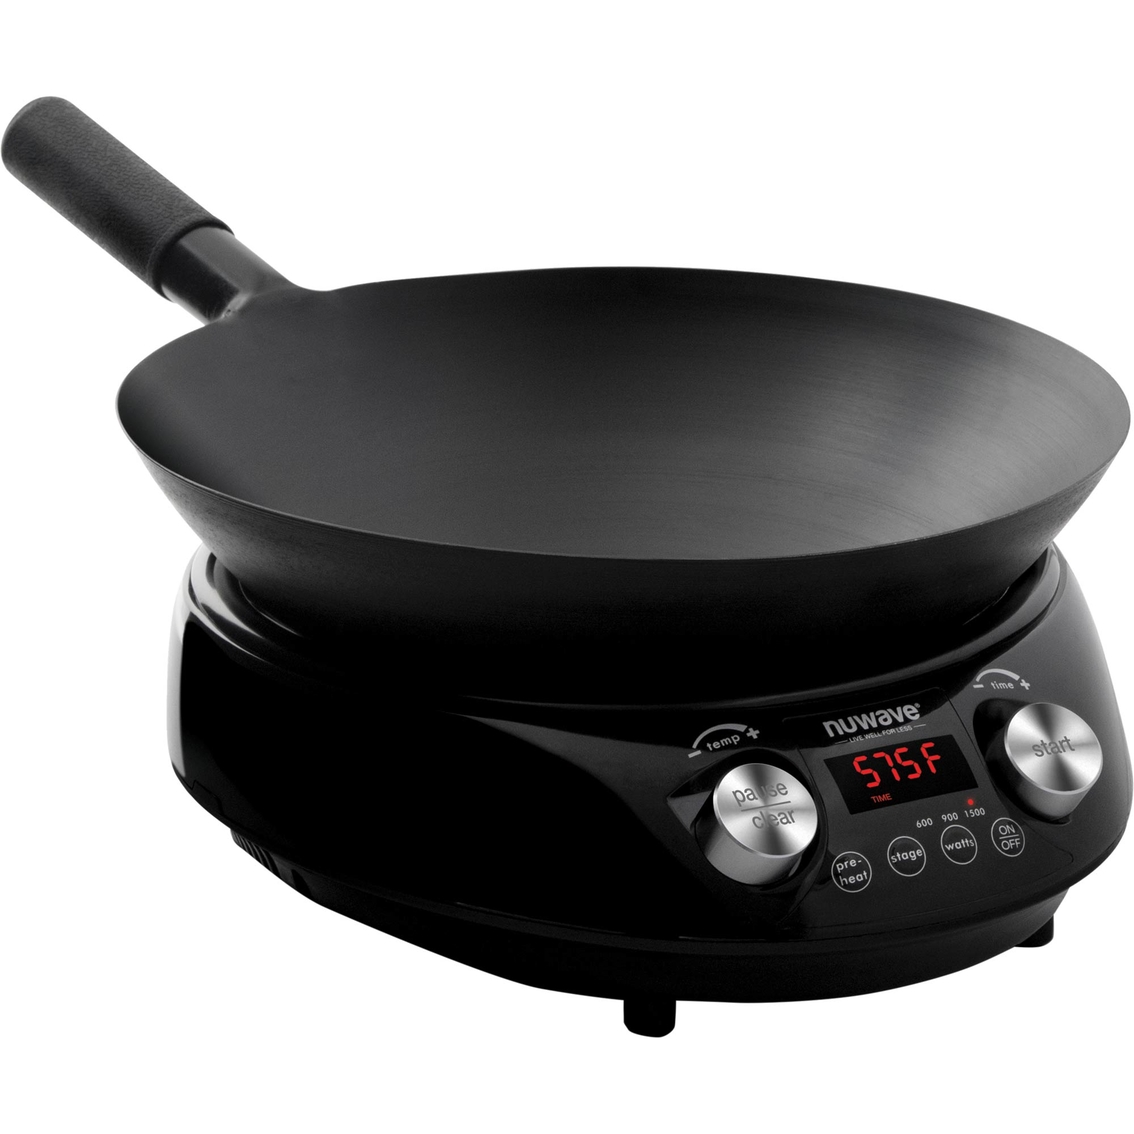 Nuwave Induction Cookware